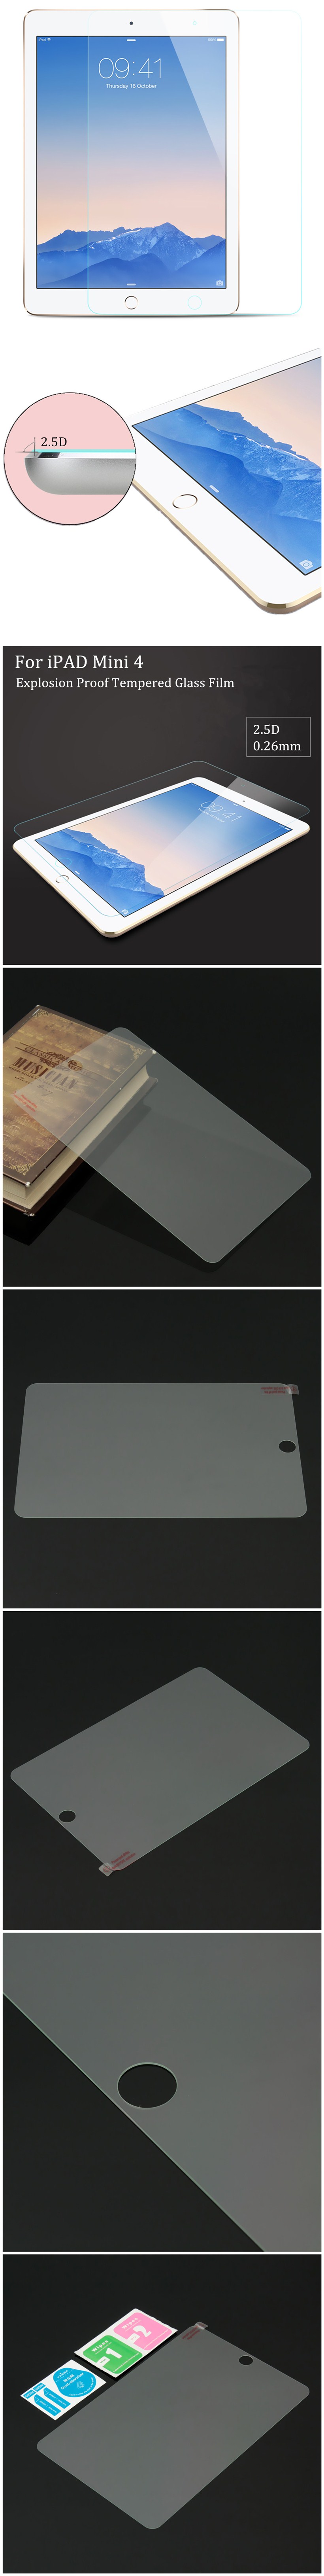 For-iPad-Mini-4-25D-026mm-Tablet-Screen-Protector-Tempered-Glass-Guard-Protective-Film-1032332